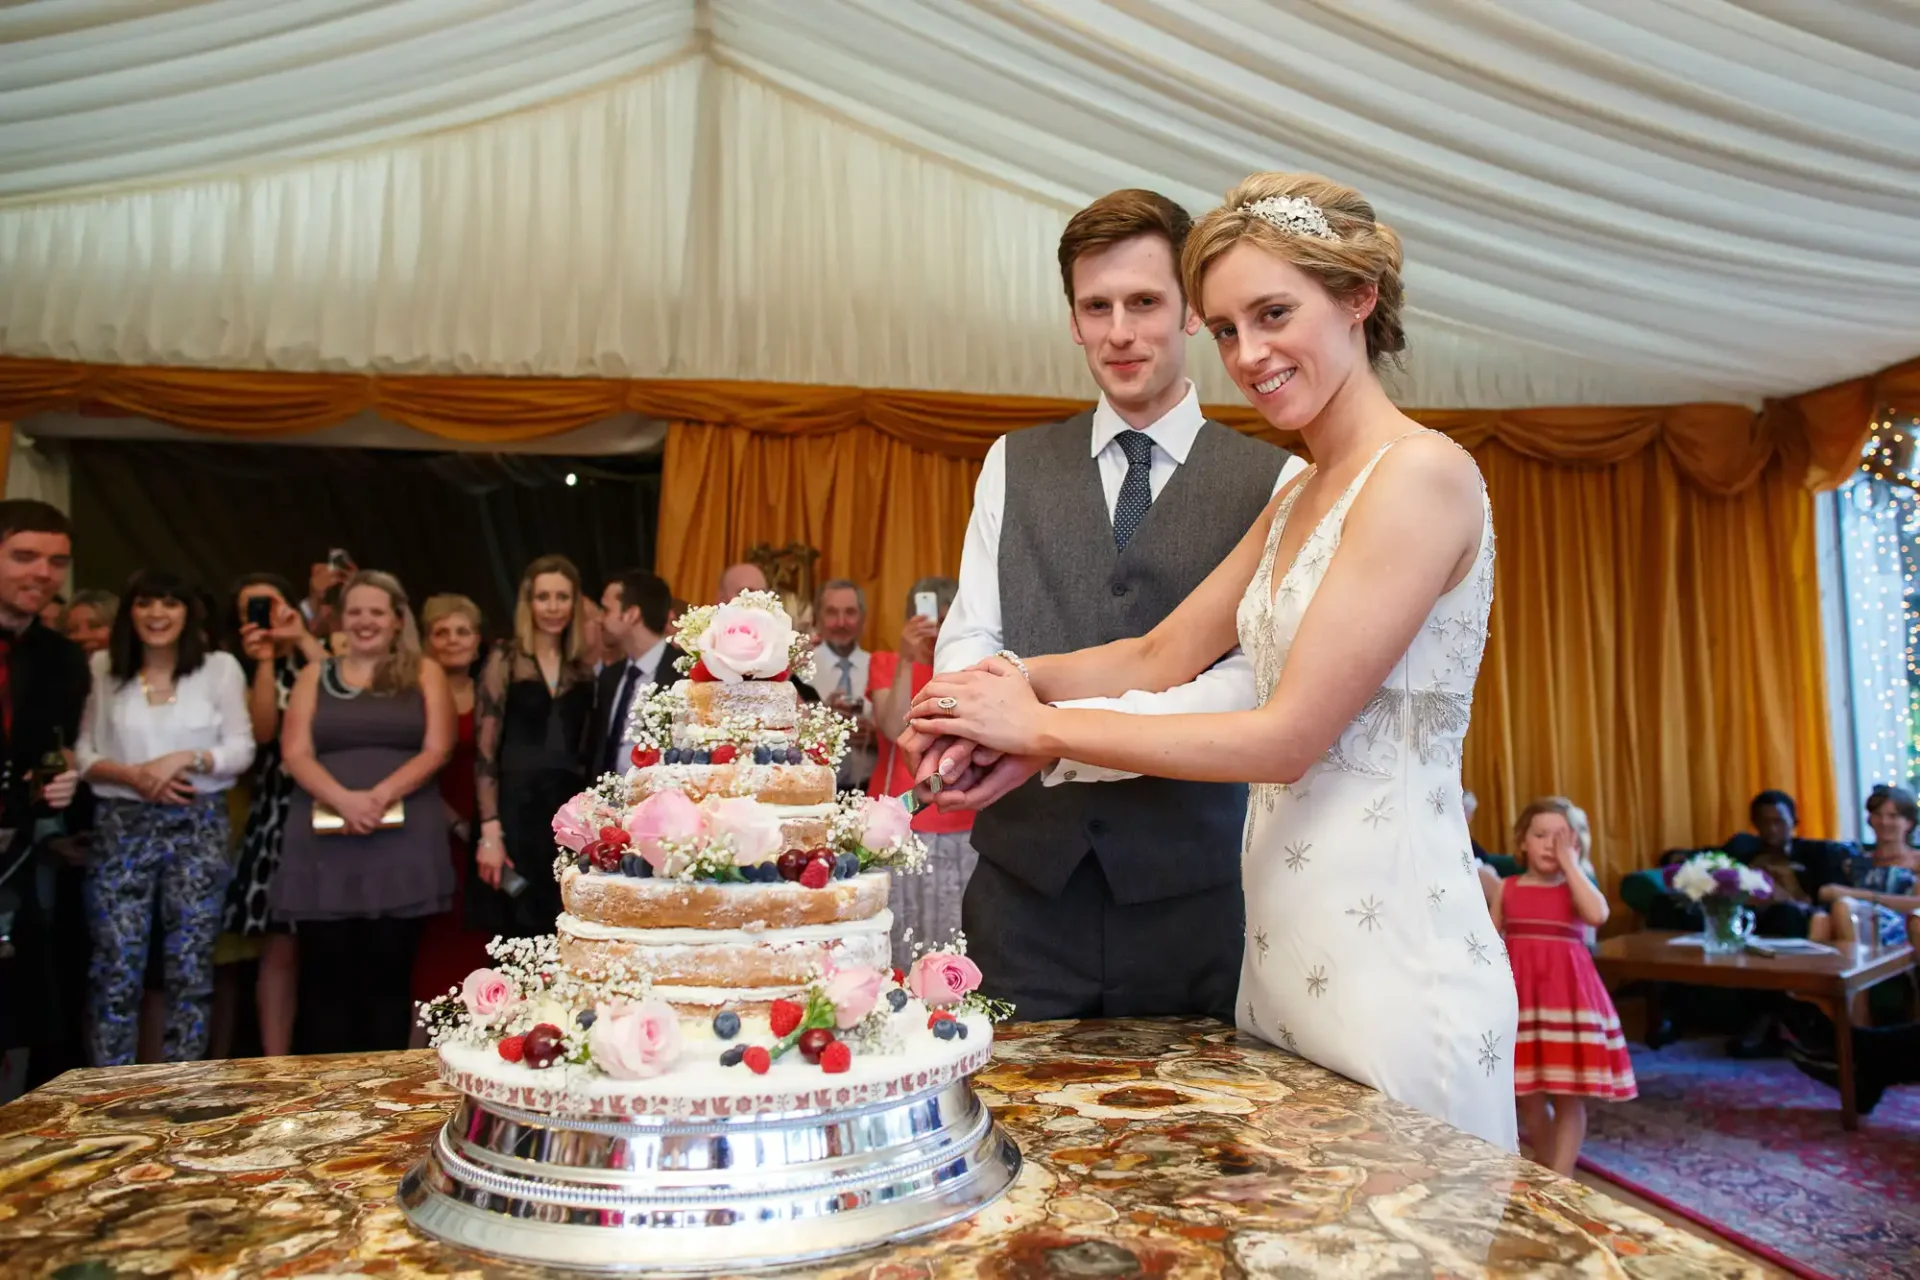 A bride and groom smiling as they cut a multi-tiered wedding cake decorated with flowers, with guests watching in the background.